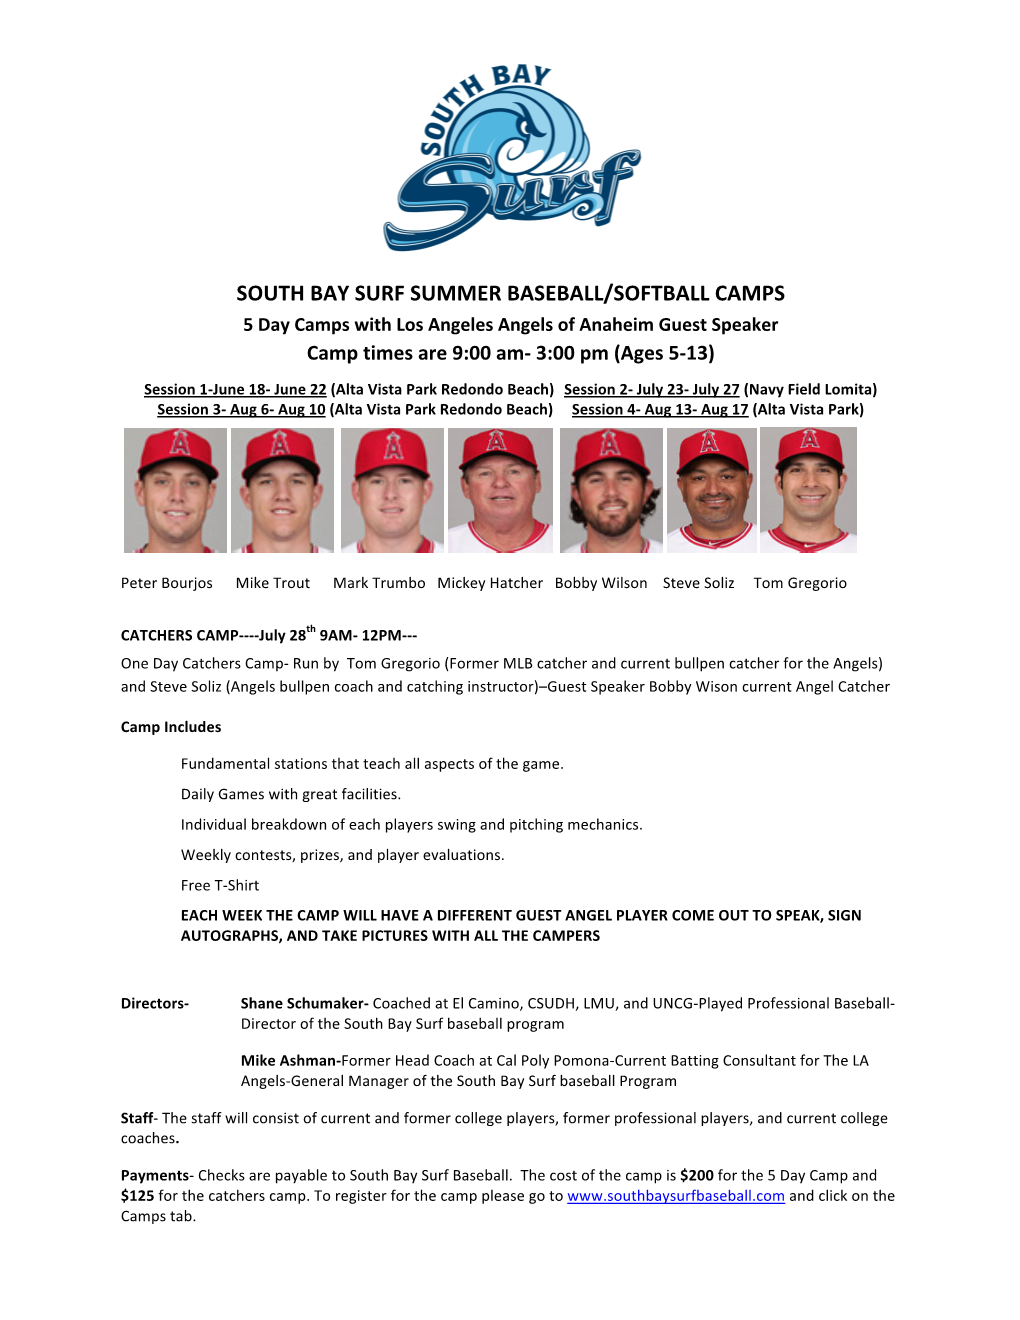 SOUTH BAY SURF SUMMER BASEBALL/SOFTBALL CAMPS 5 Day Camps with Los Angeles Angels of Anaheim Guest Speaker Camp Times Are 9:00 Am- 3:00 Pm (Ages 5-13)